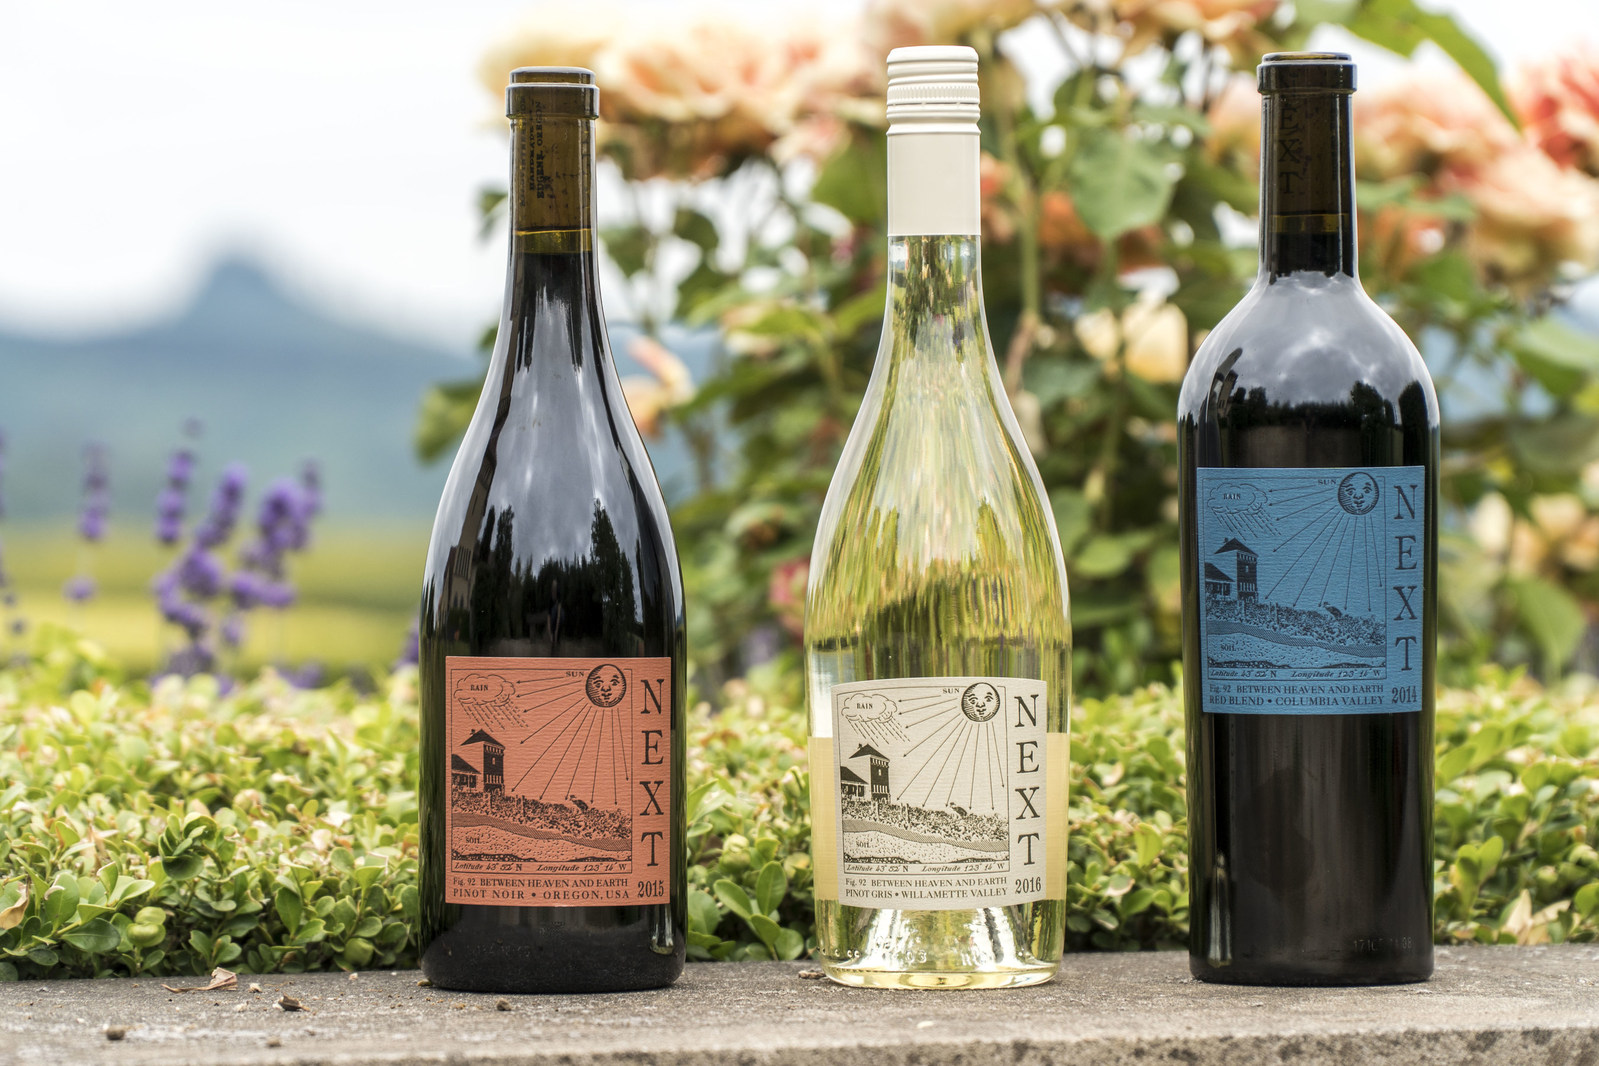 Amazon Just Launched Its Own Line of Wines